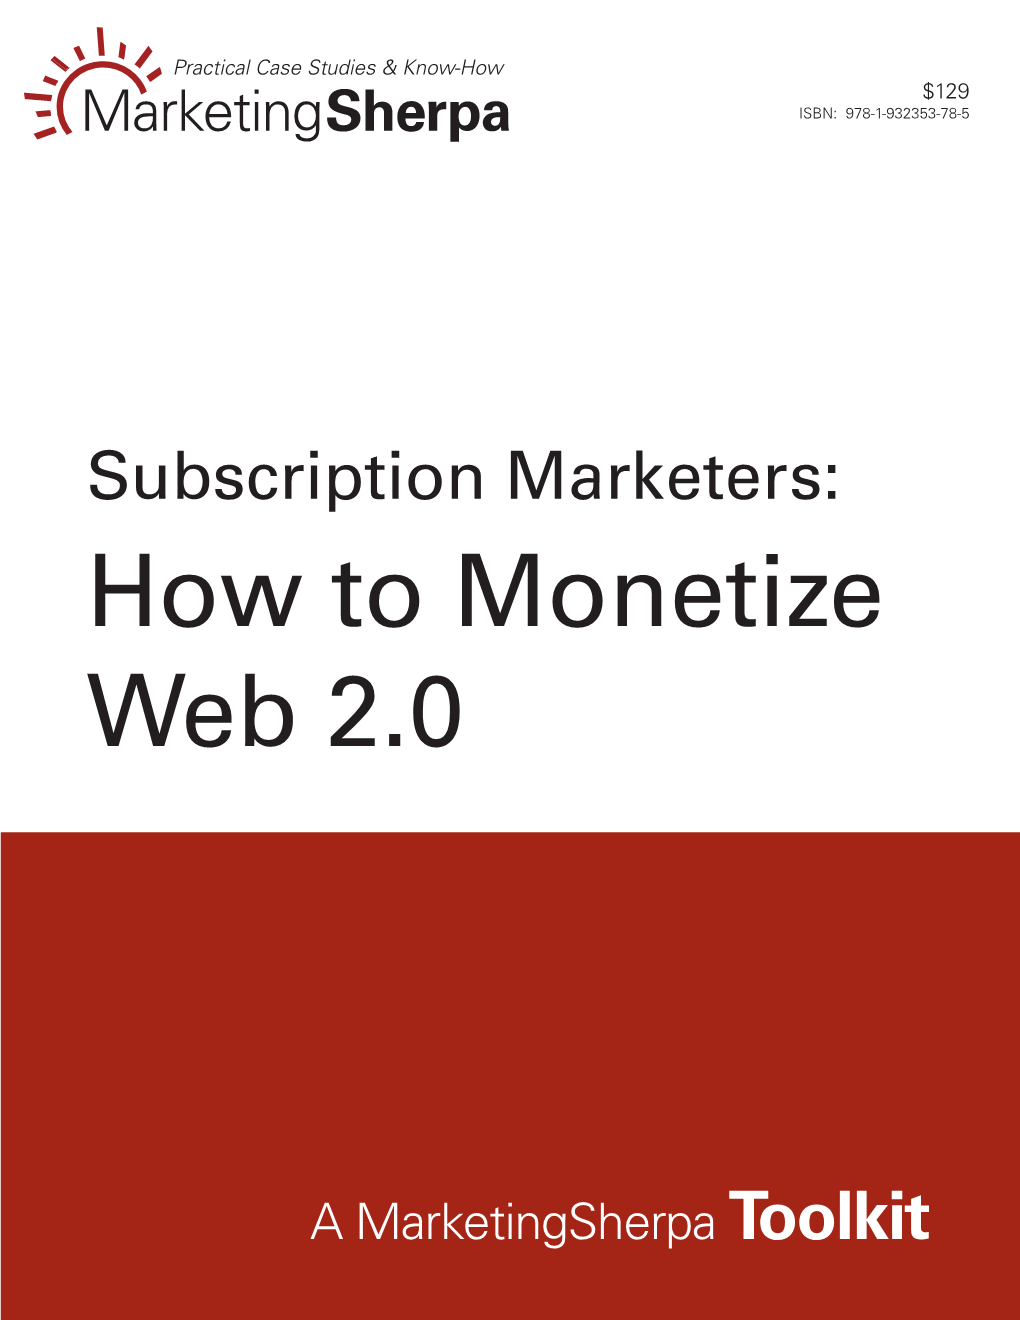 How to Monetize Web 2.0